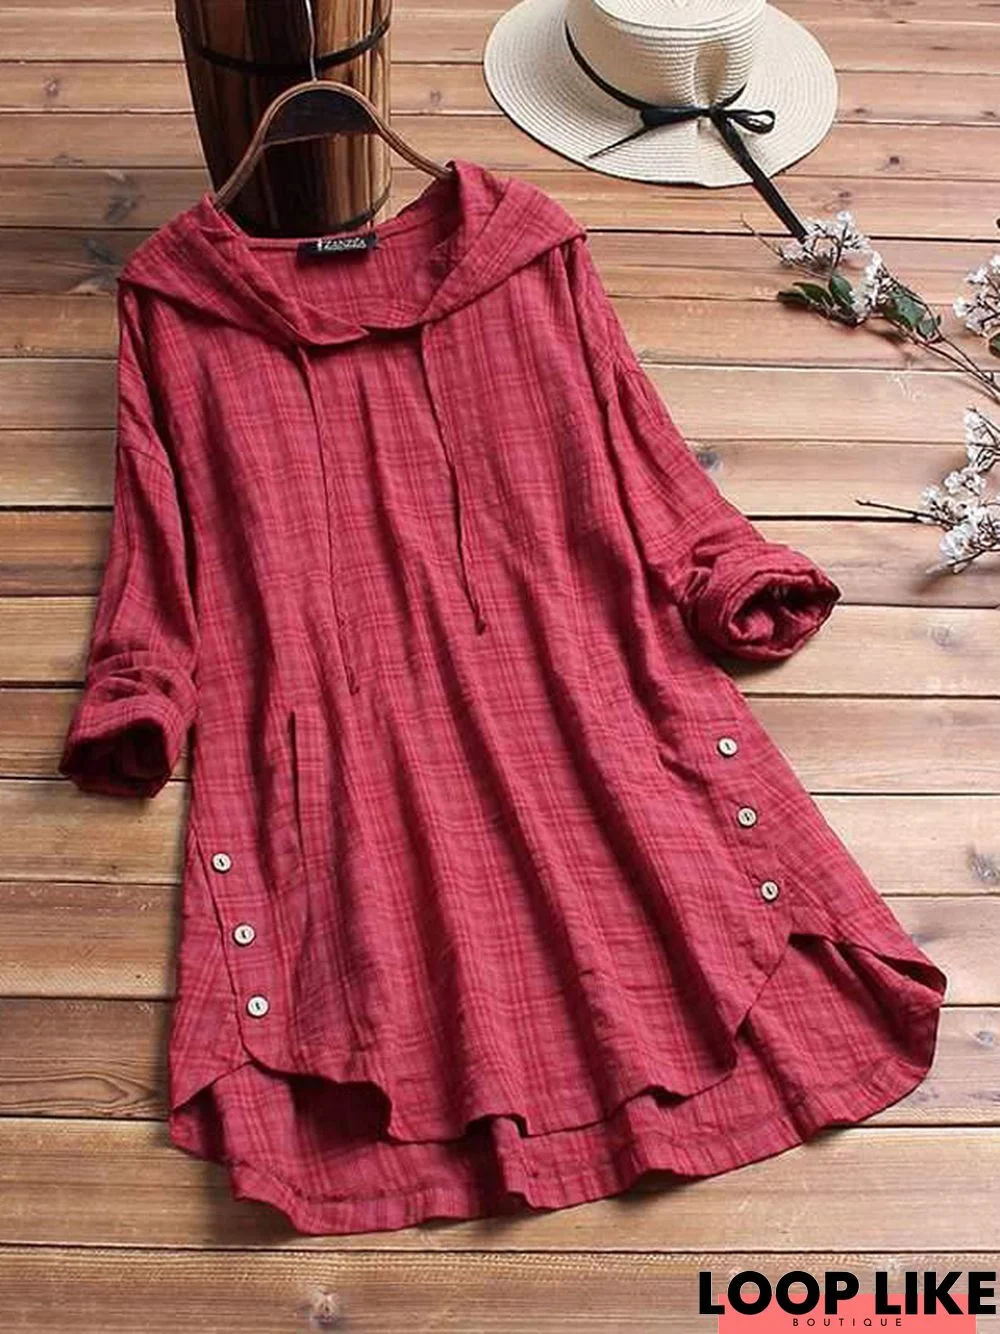 Plus Size Blouse Women Casual Hooded Long Sleeve Check Plaid Loose Tops Shirts Linen